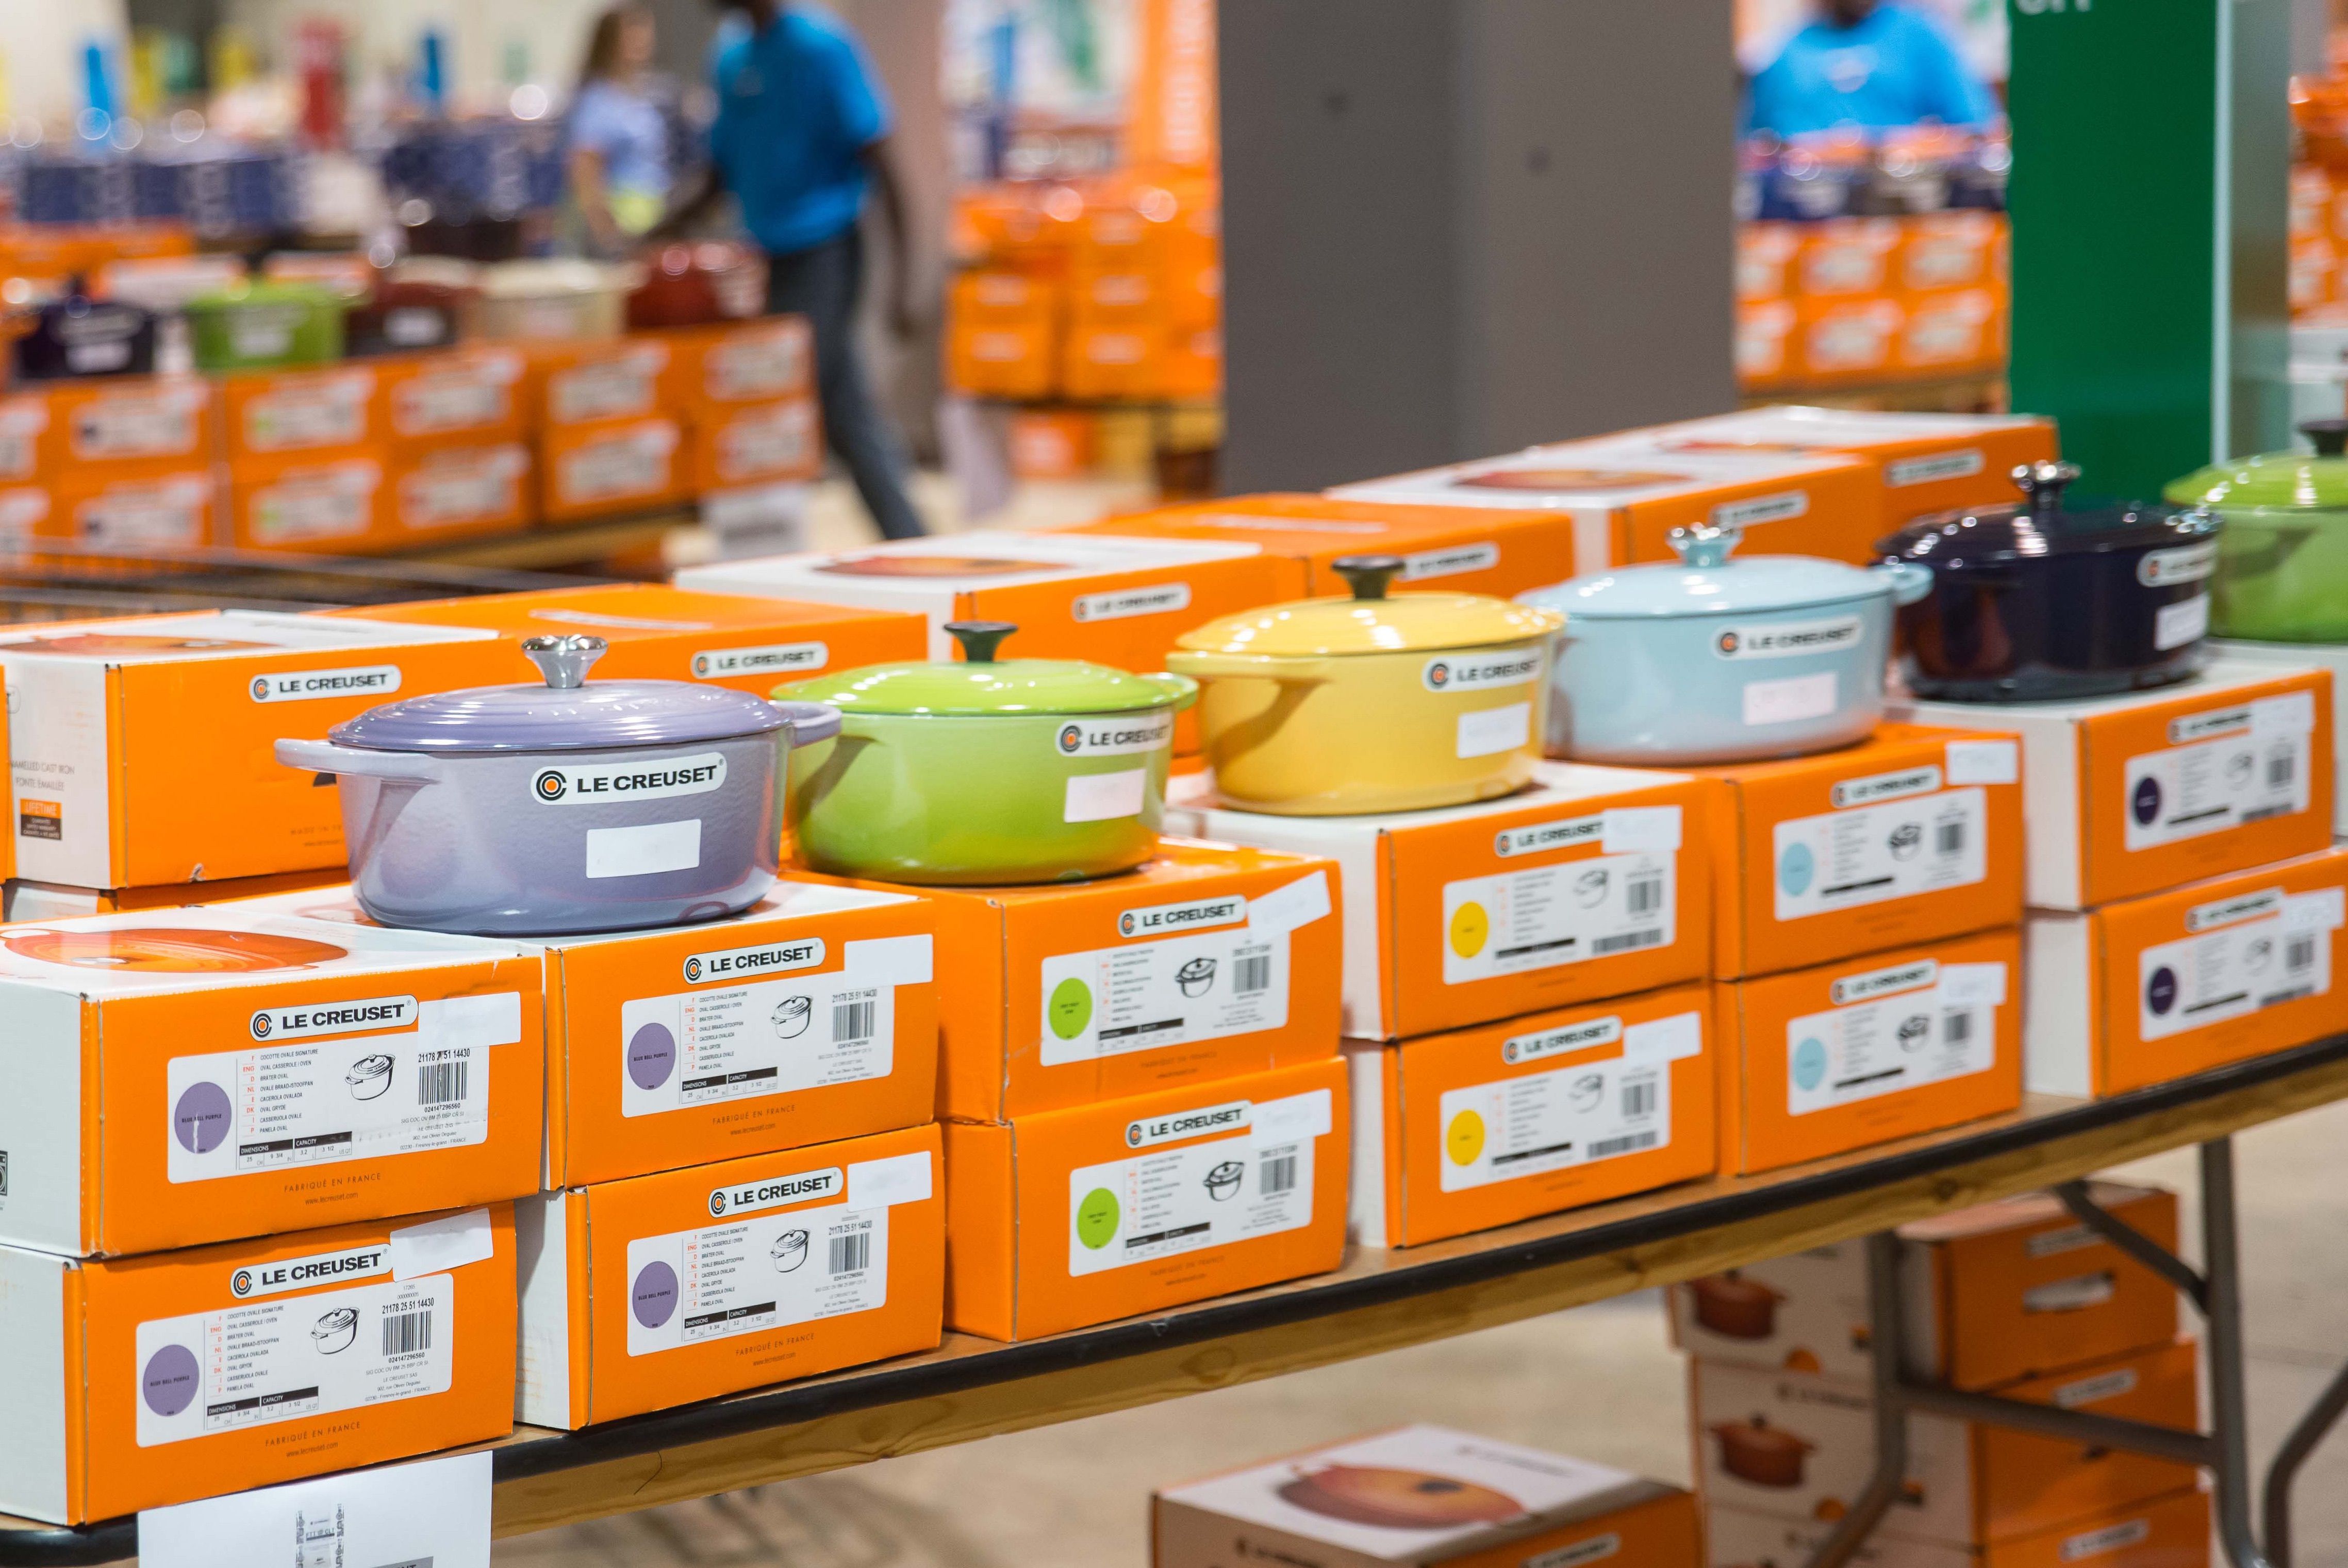 Le Creuset cookware sale coming to Philly Expo Center in Oaks